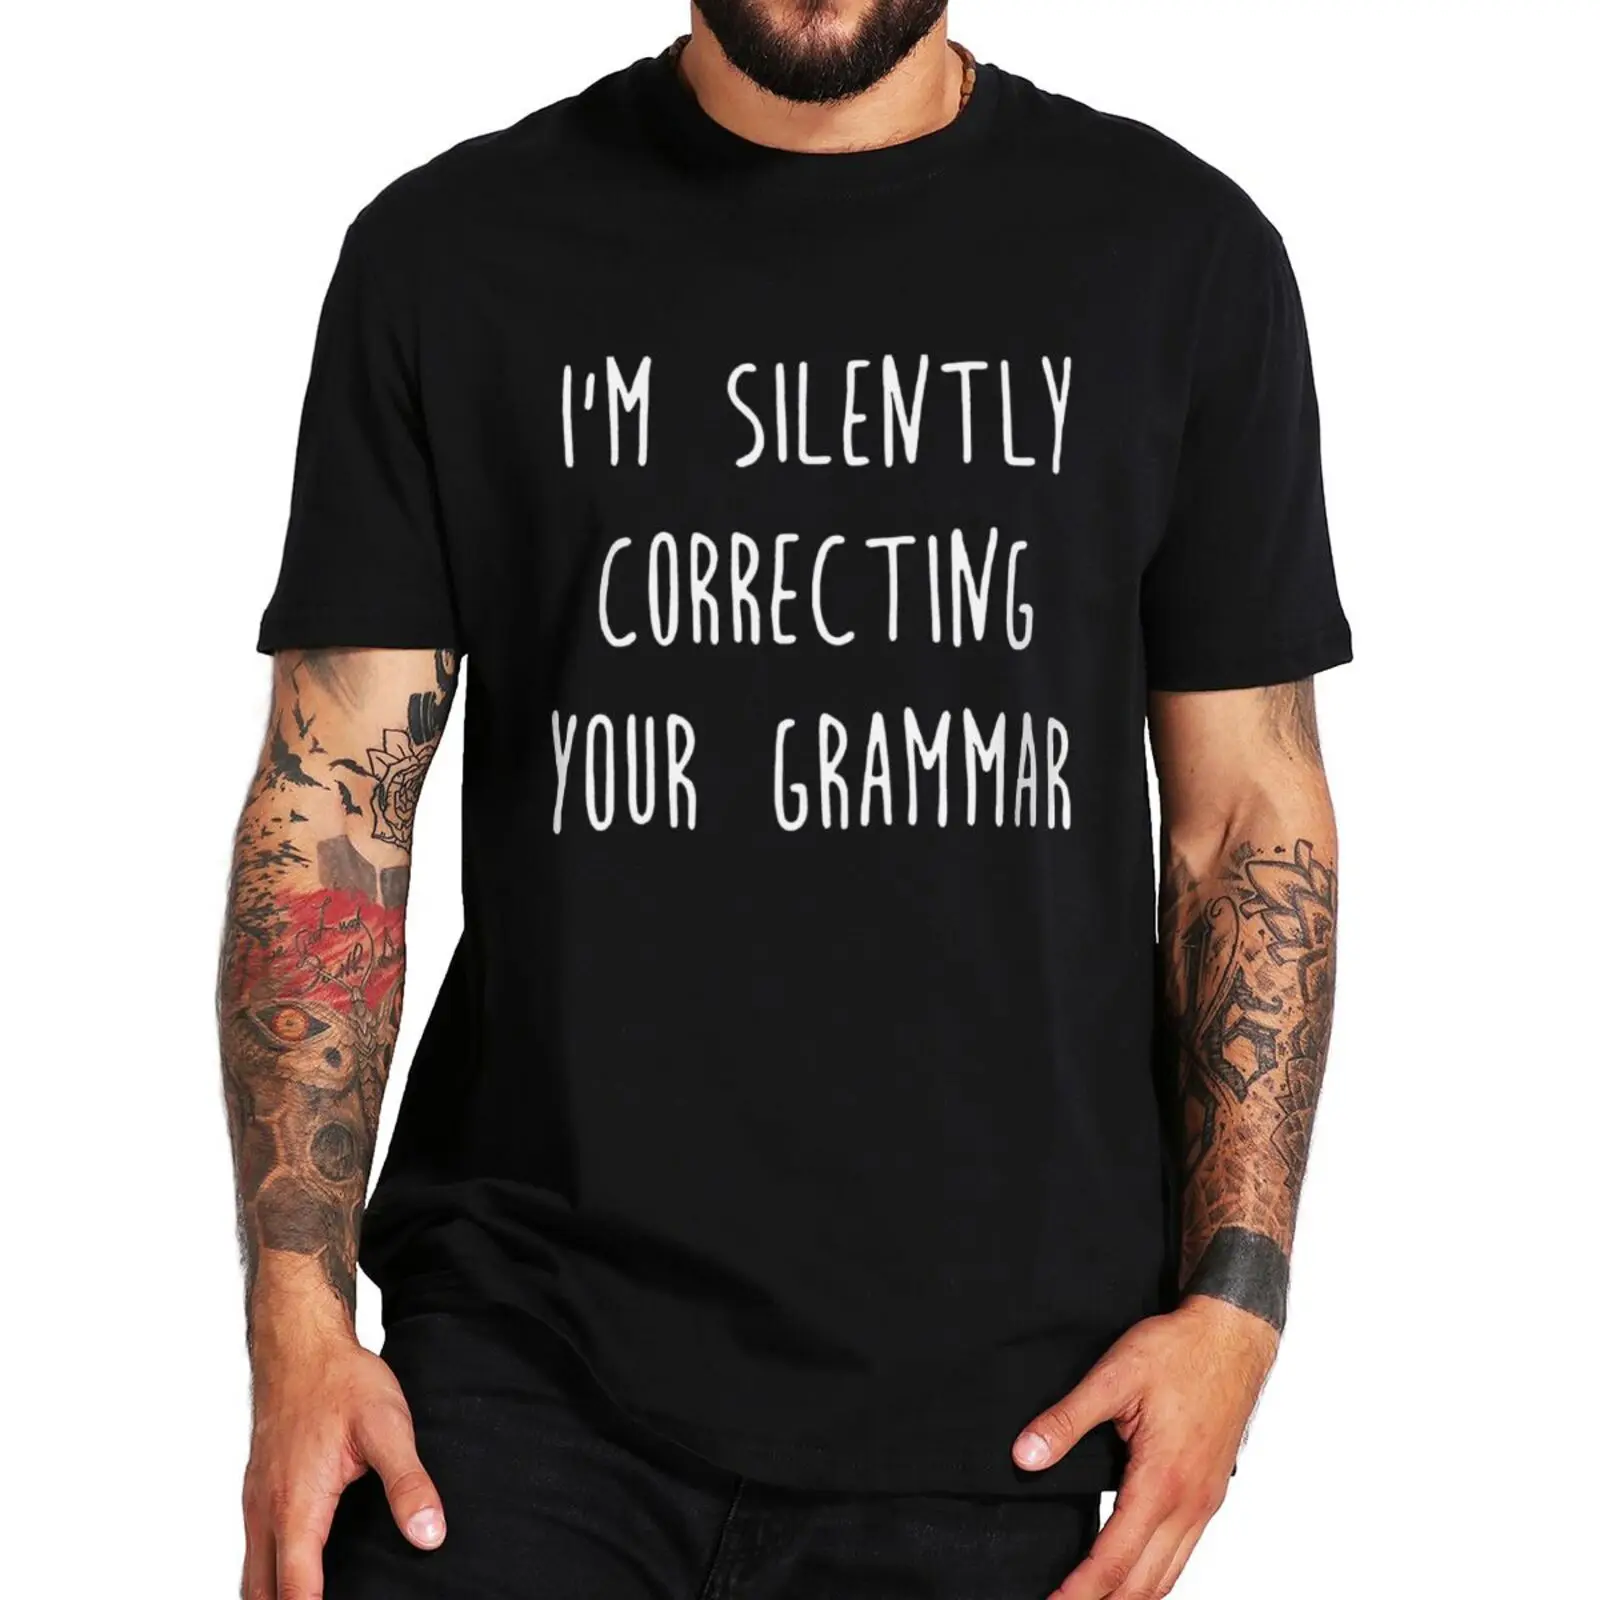 

I'm Silently Correcting Your Grammar T-shirt Funny Sayings Jokes Slogan Tee Tops Summer Unisex Oversized Cotton Casual T Shirts